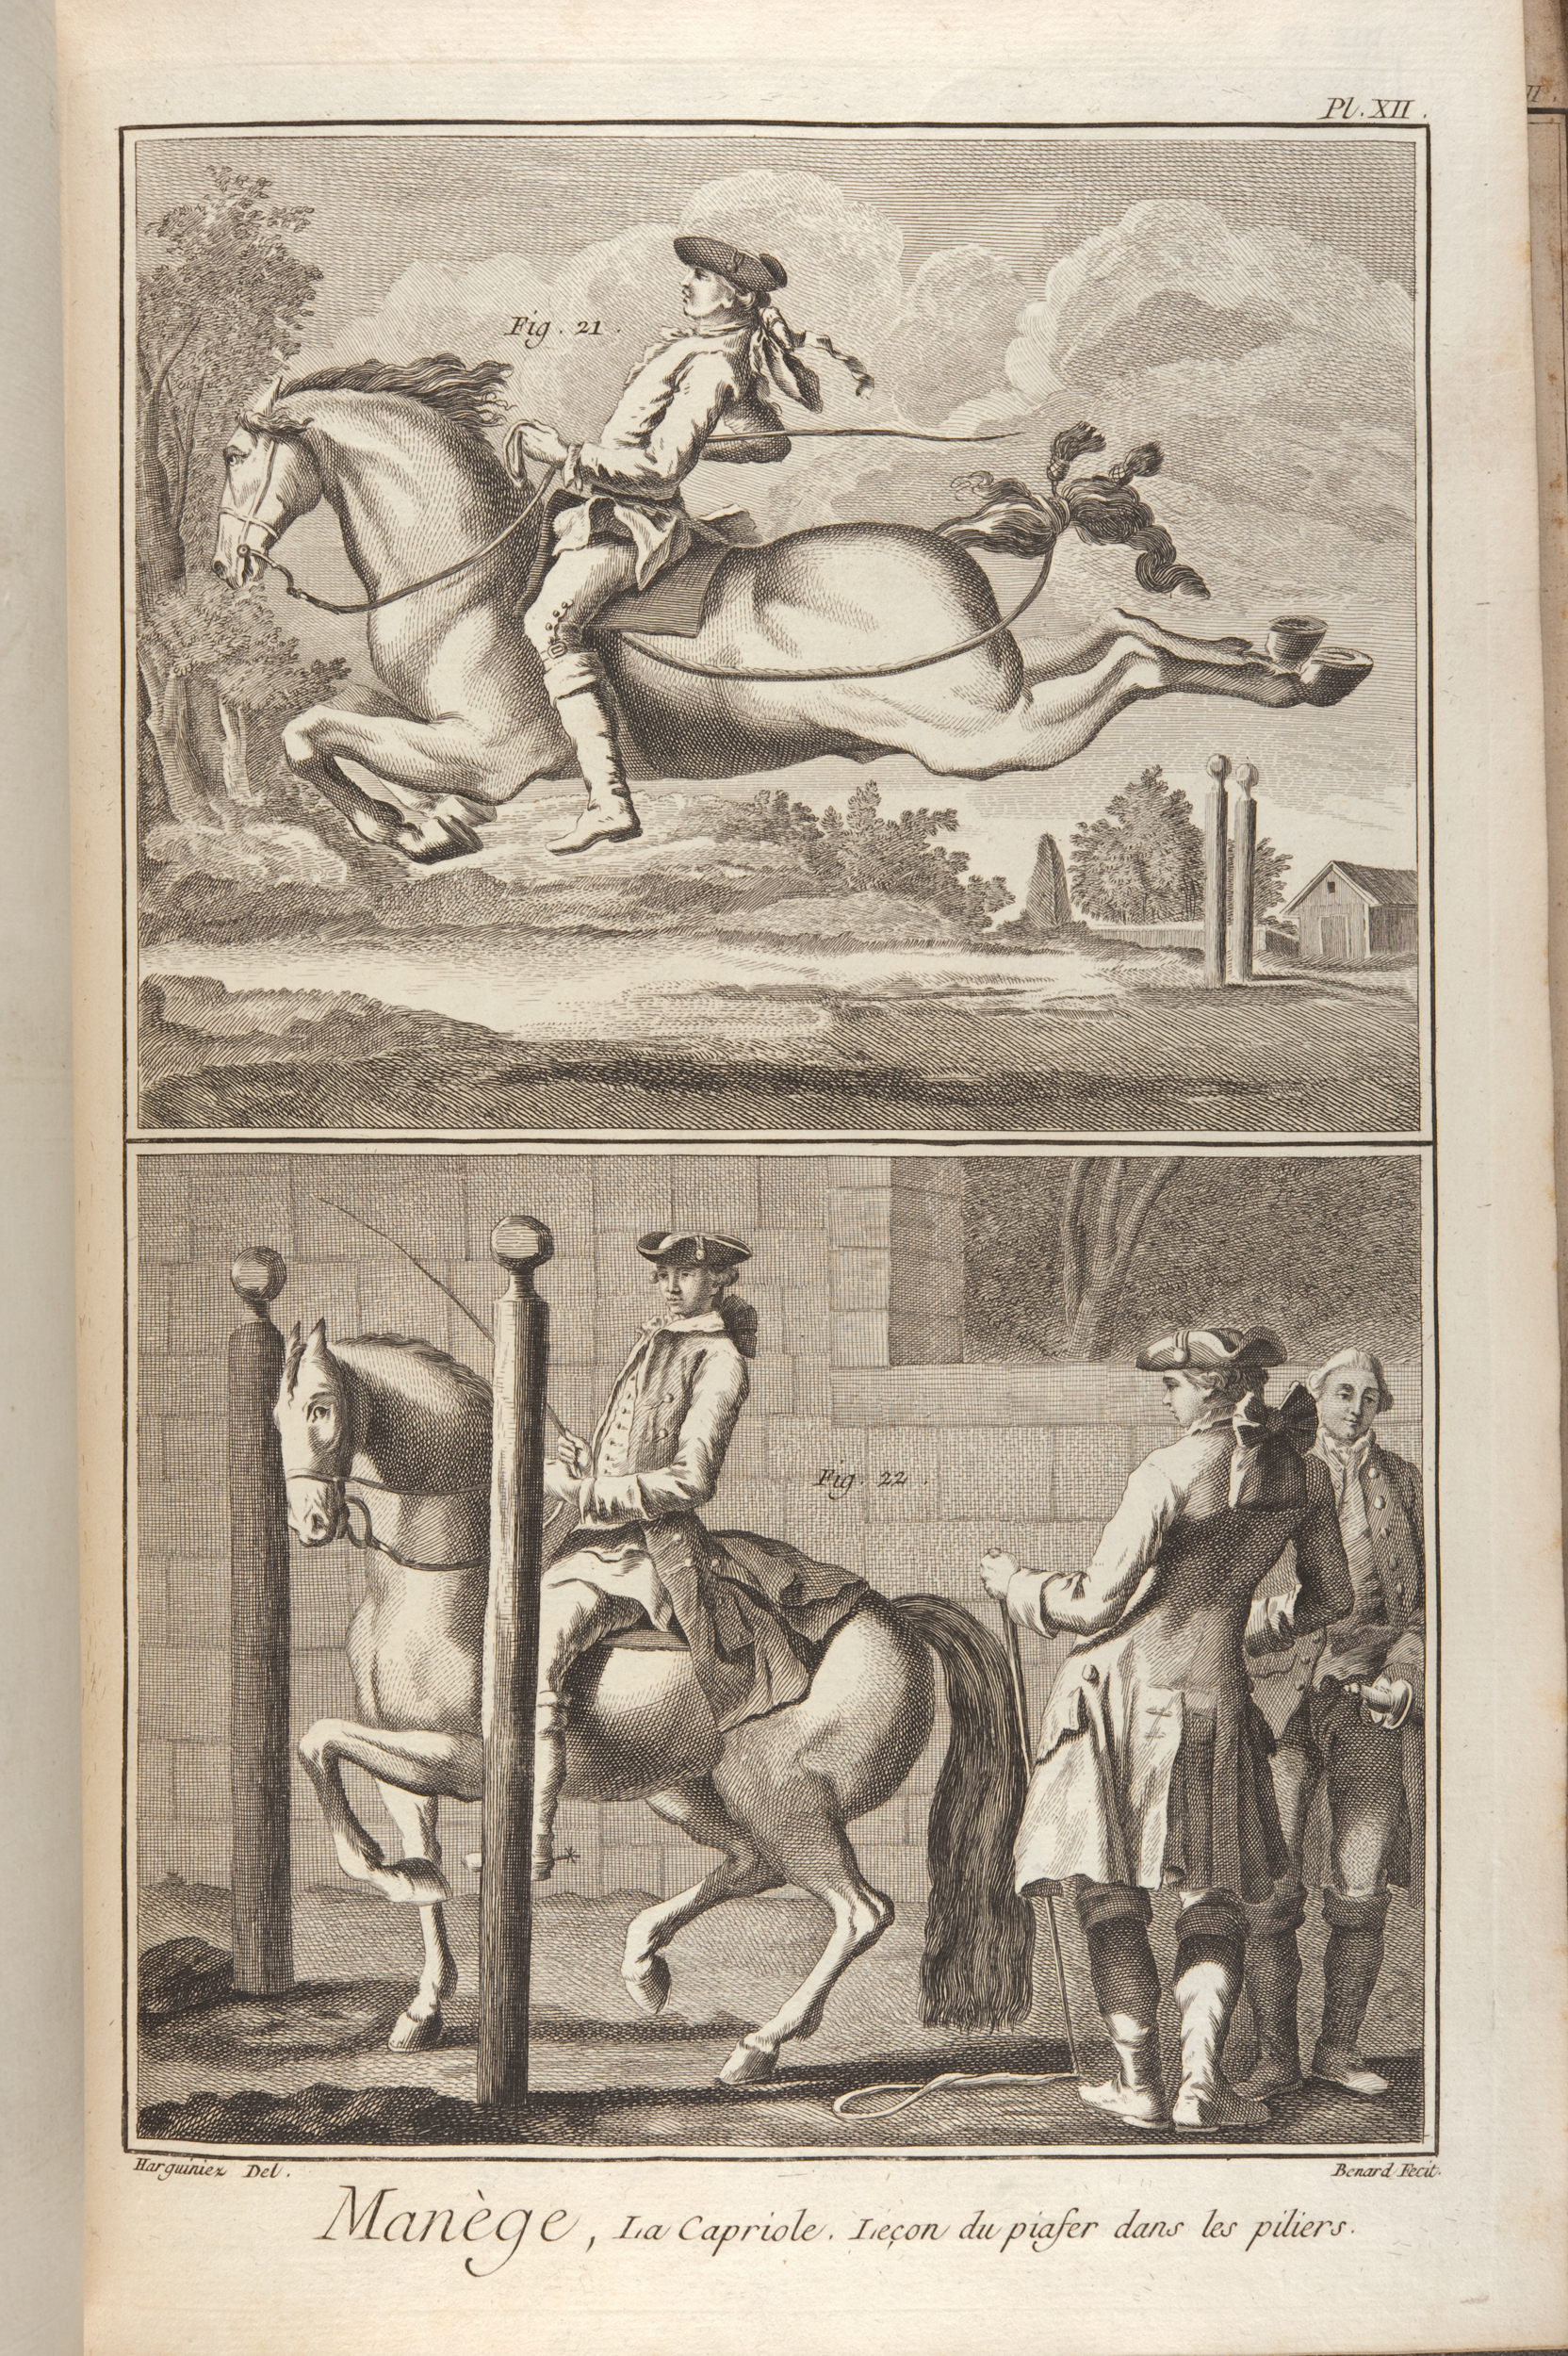 Plate depicting "Manege, La Capriole" ( )from Diderot & d’Alembert’s Encyclopédie (St Andrews copy at =sf AE25.D5)